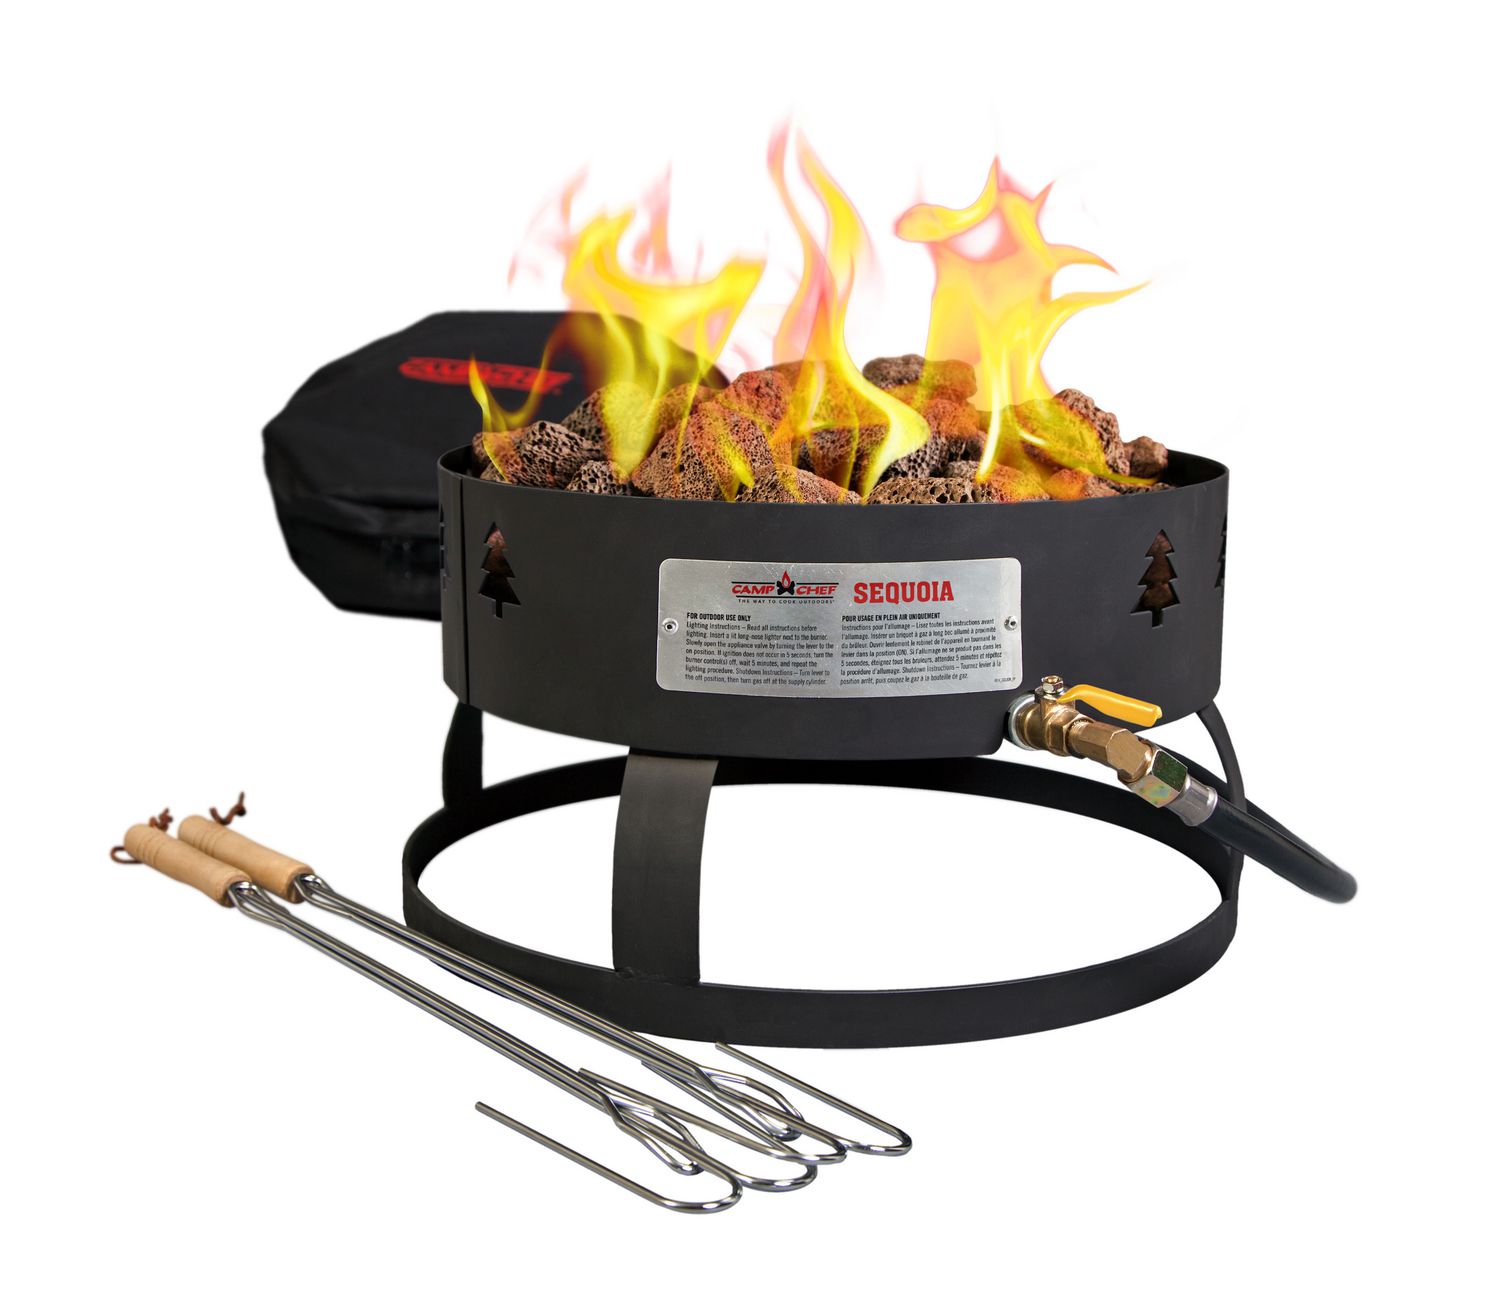 Camp Chef Sequoia Propane Fire Pit, Portable Gas Fire Pit Camping